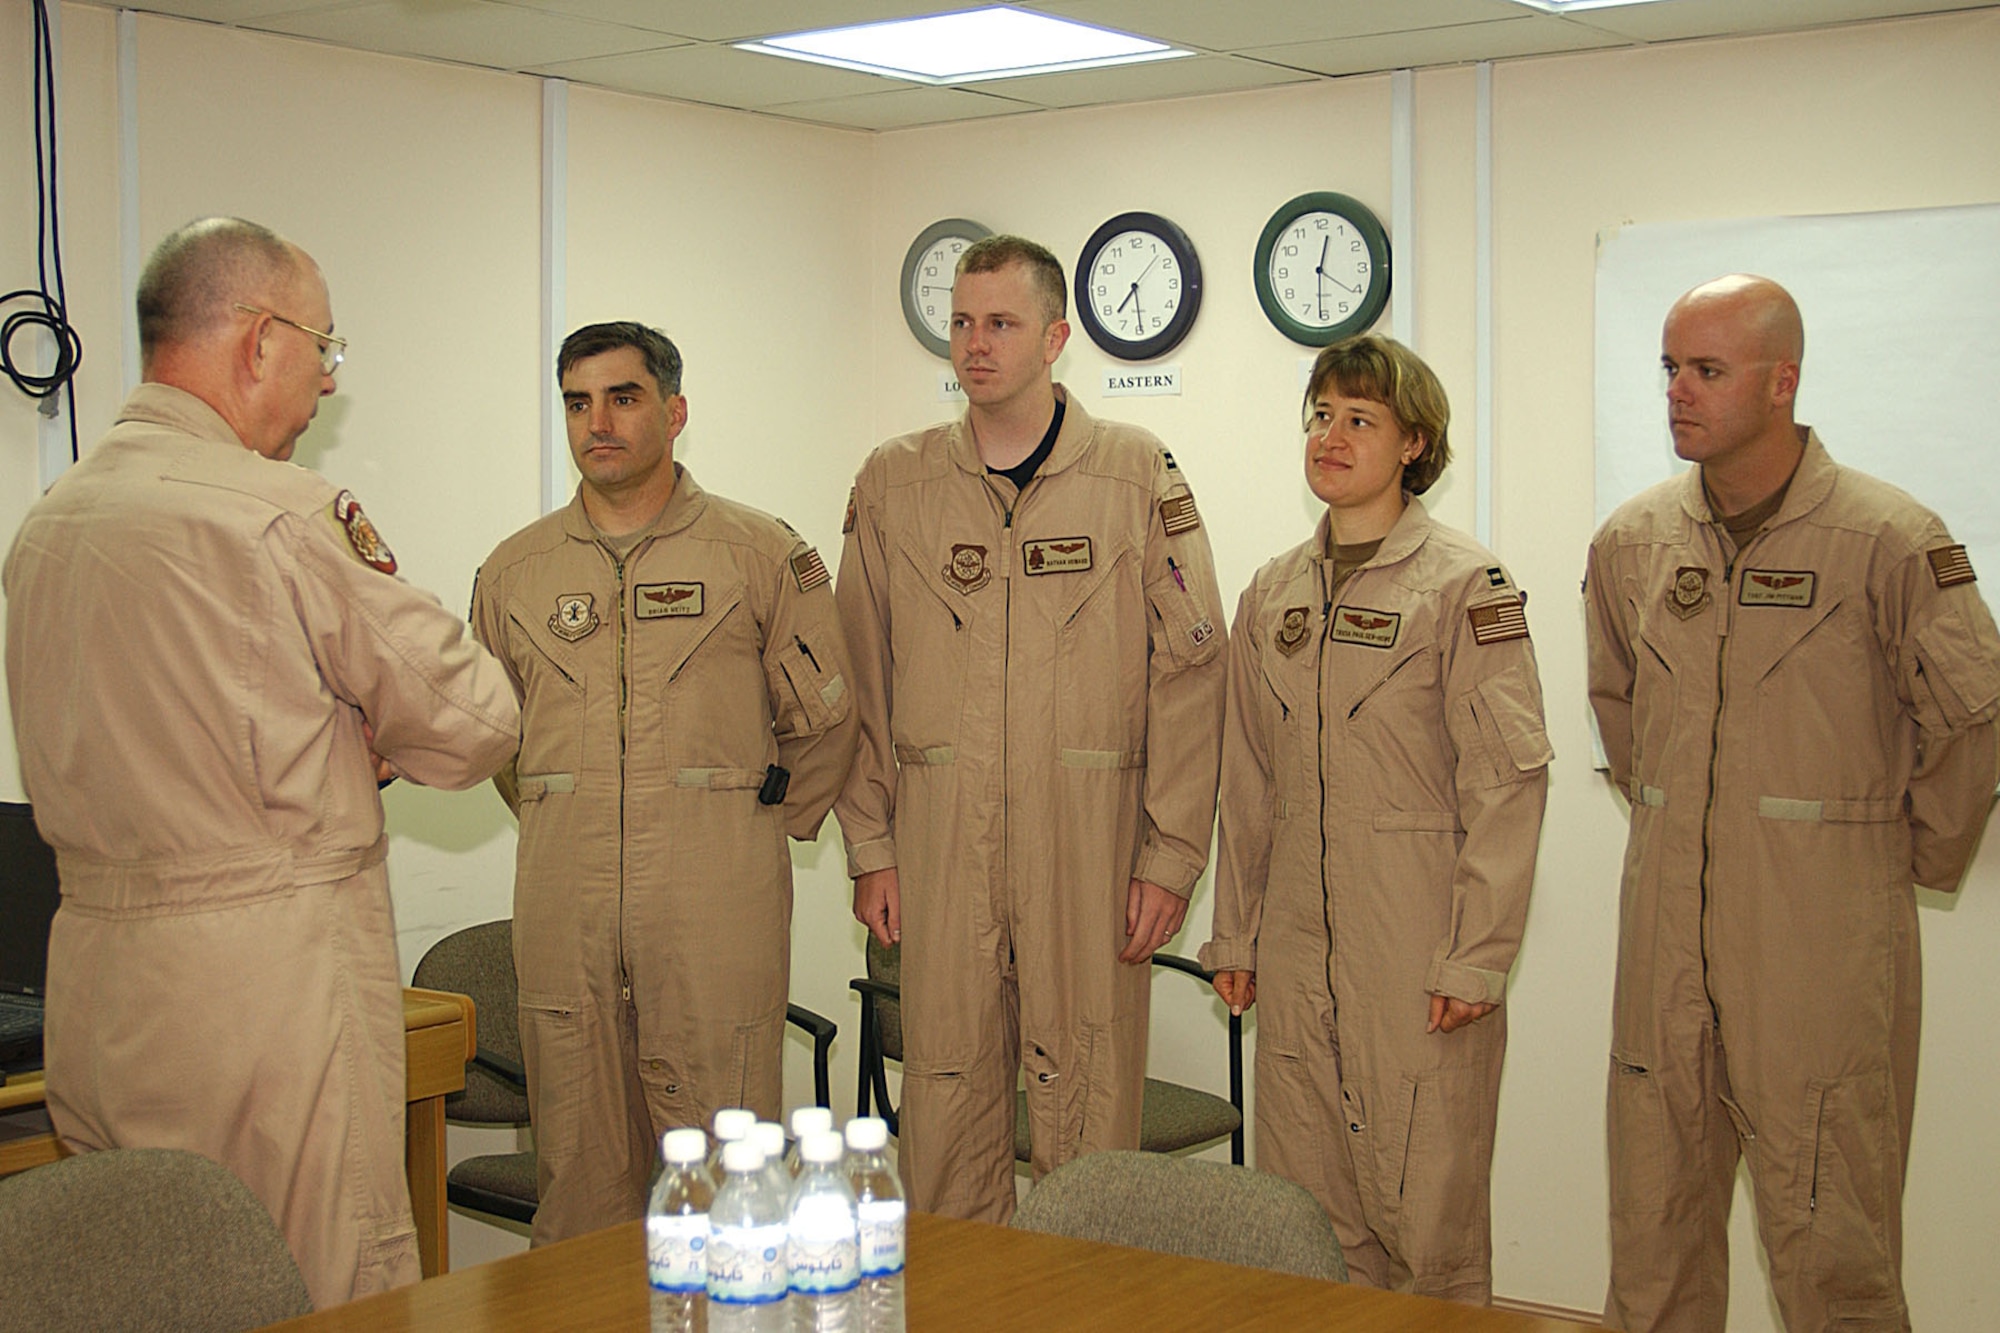 Gen T. Michael Moseley (left), USAF Chief of Staff, presents the Distinguished Flying Cross to (facing forward, left to right) Maj. Brian Neitz, Capt. Nathan Howard, Capt. Tricia Paulsen-Howe and TSgt. Jim Pittman. On April 7, 2003, this KC-135 crew put themselves in harm's way to help the crew of a downed F-15E. (U.S. Air Force photo)